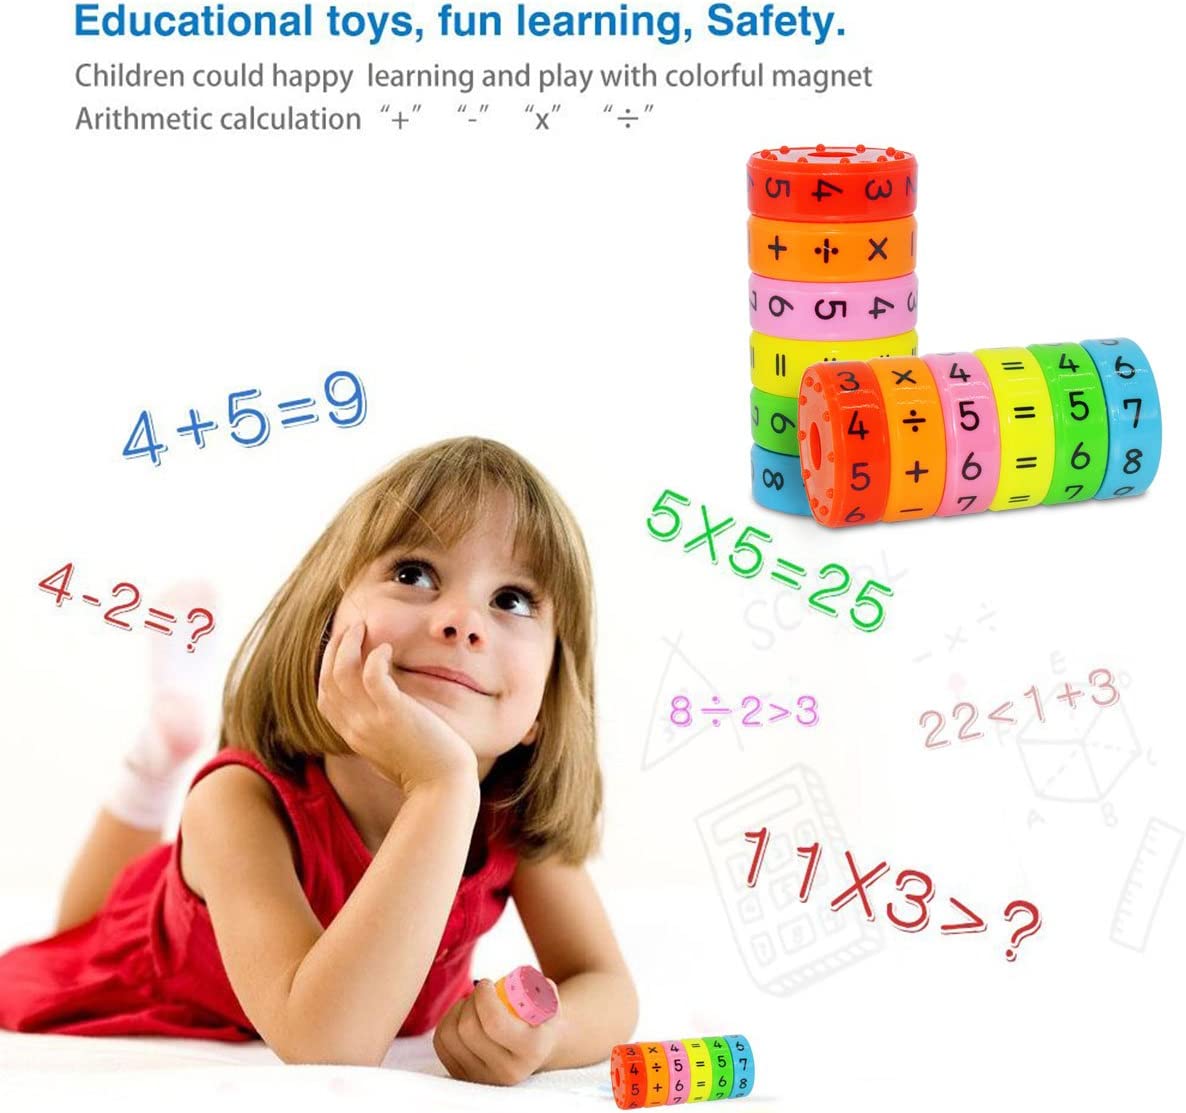 Magnetic Arithmetic Learning Toy-2